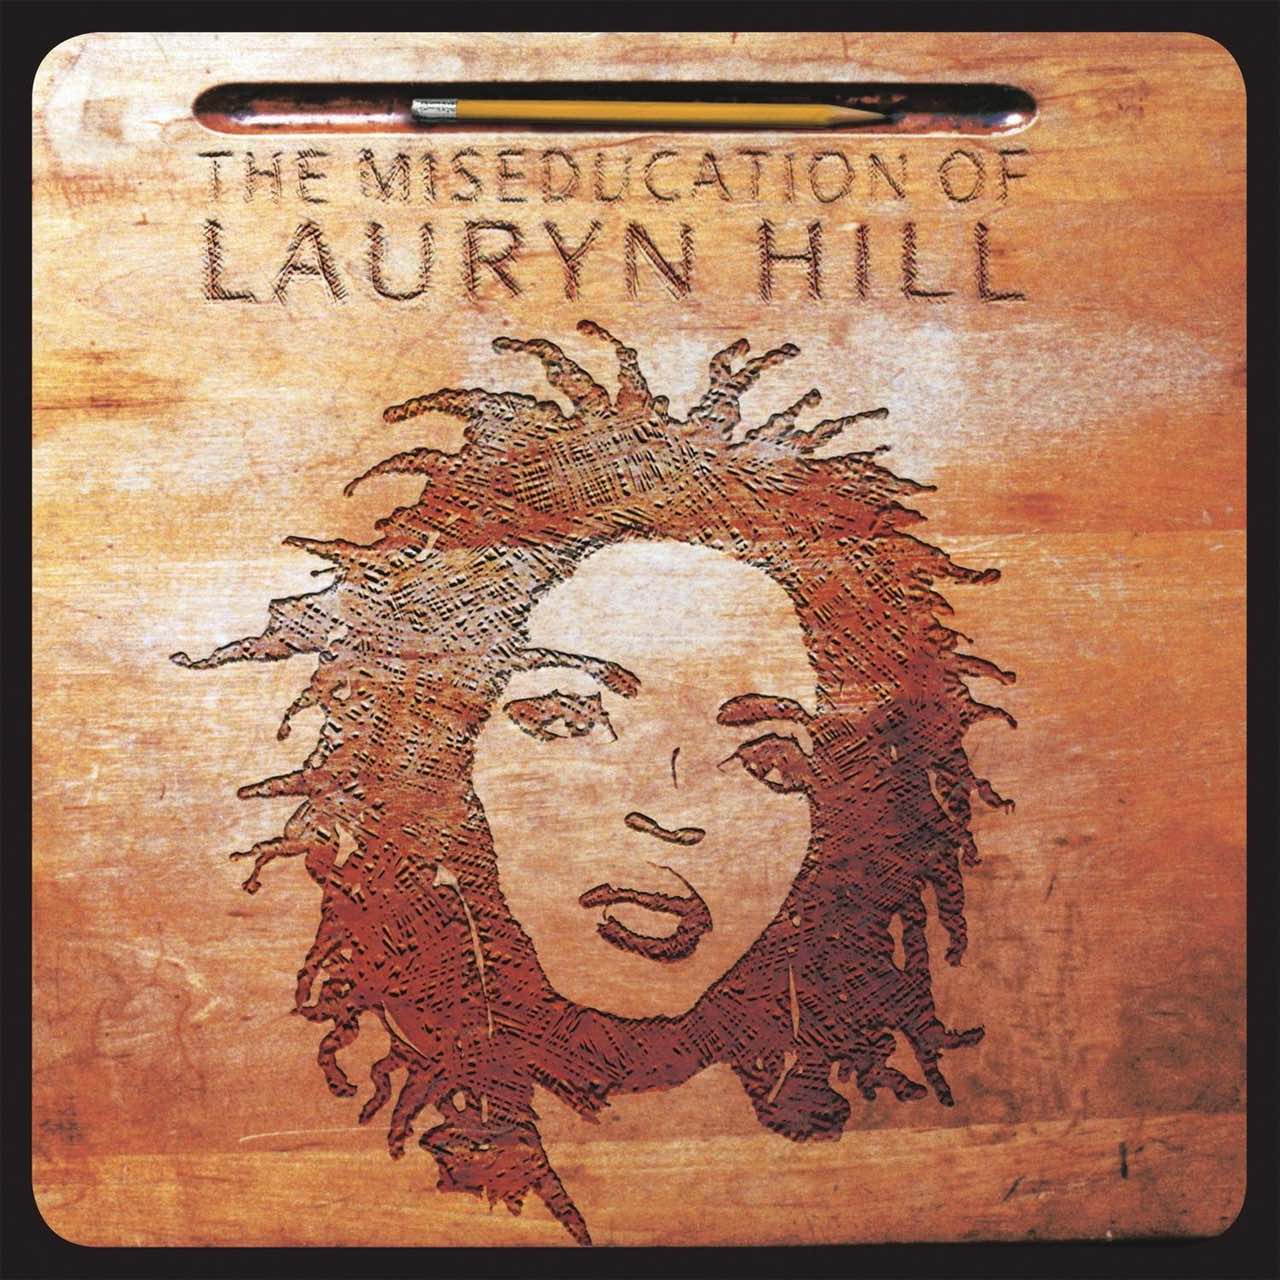 tft-podcast-297-the-miseducation-of-lauryn-hill-overthinking-it